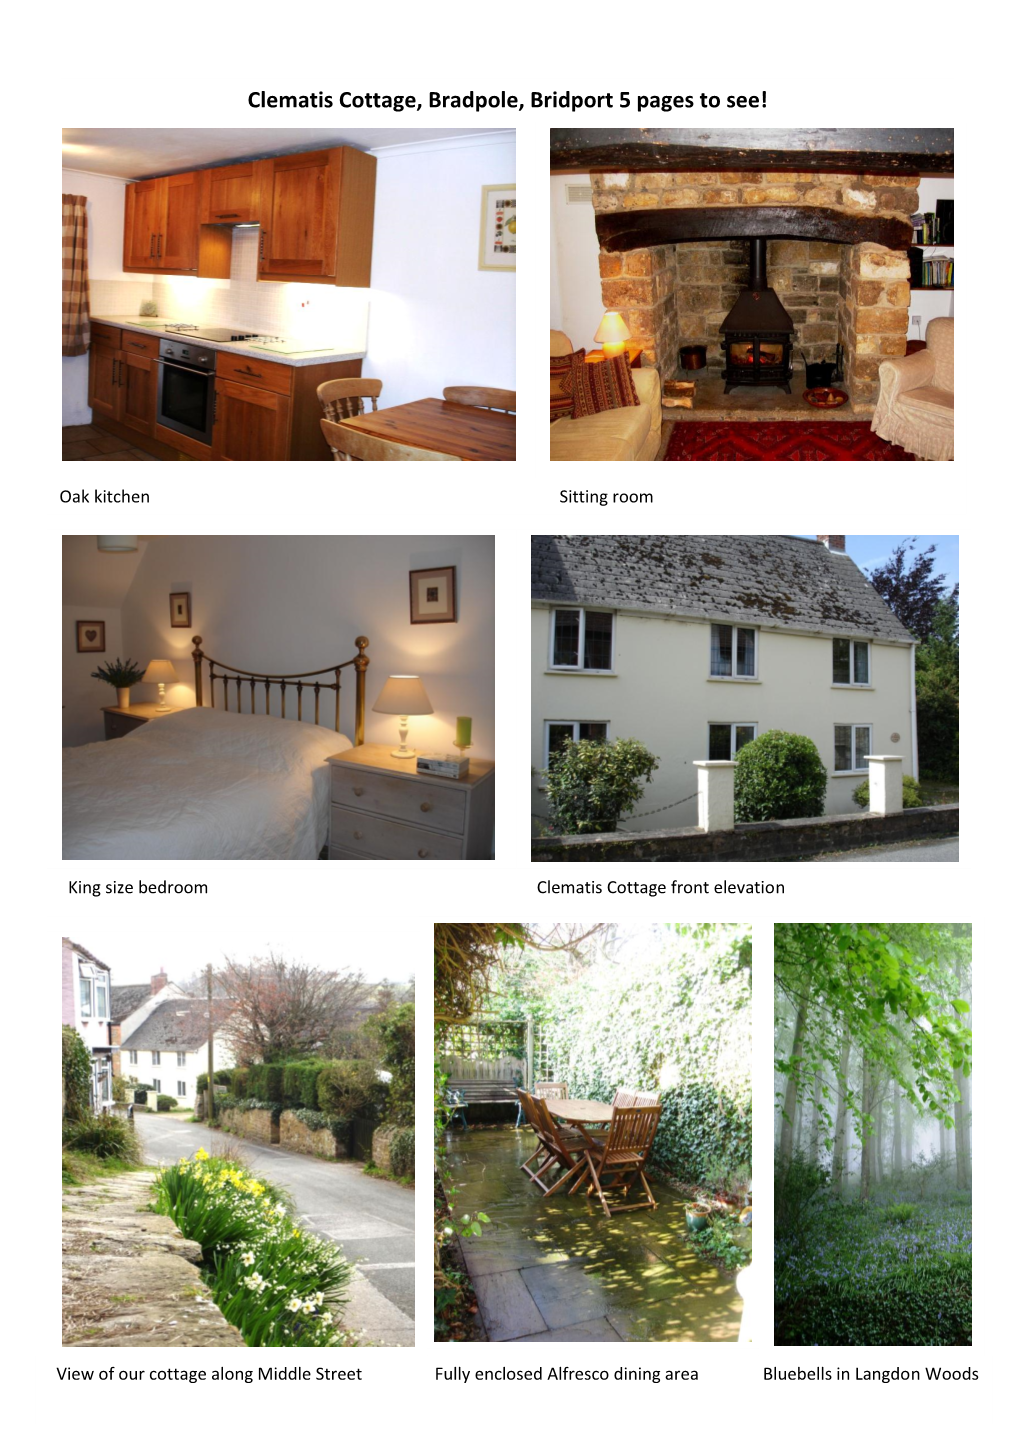 Clematis Cottage, Bradpole, Bridport 5 Pages to See!